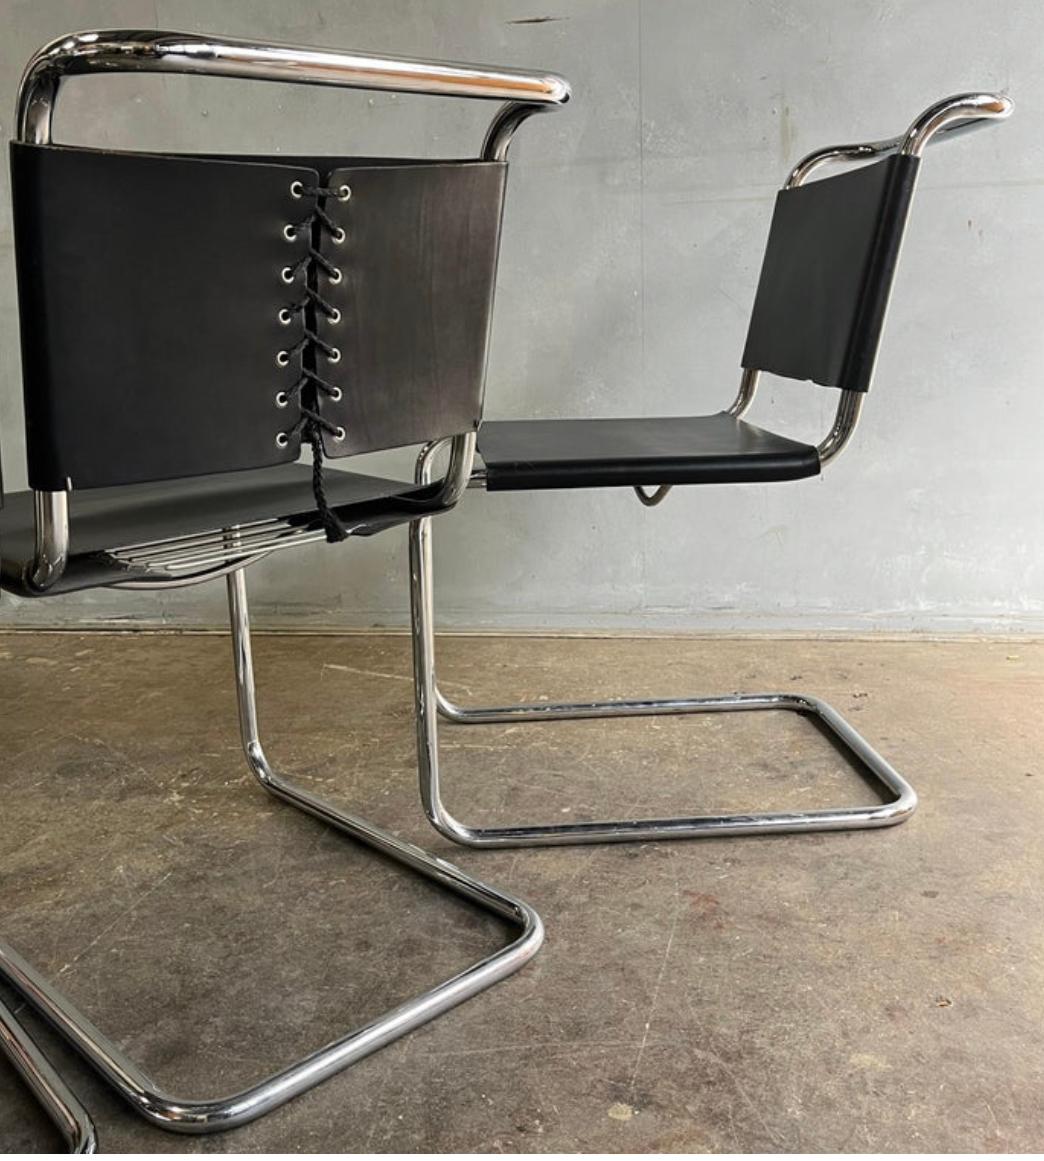 Knoll Spoleto chairs. Marcel Breuer designed the B33 chair in 1927, it is based on the cantilever principle (cantilevered), in the same spirit as the famous B3 chair or “Wassily chair” that he designed in 1925.

Purchased from Knoll in 1974. Black